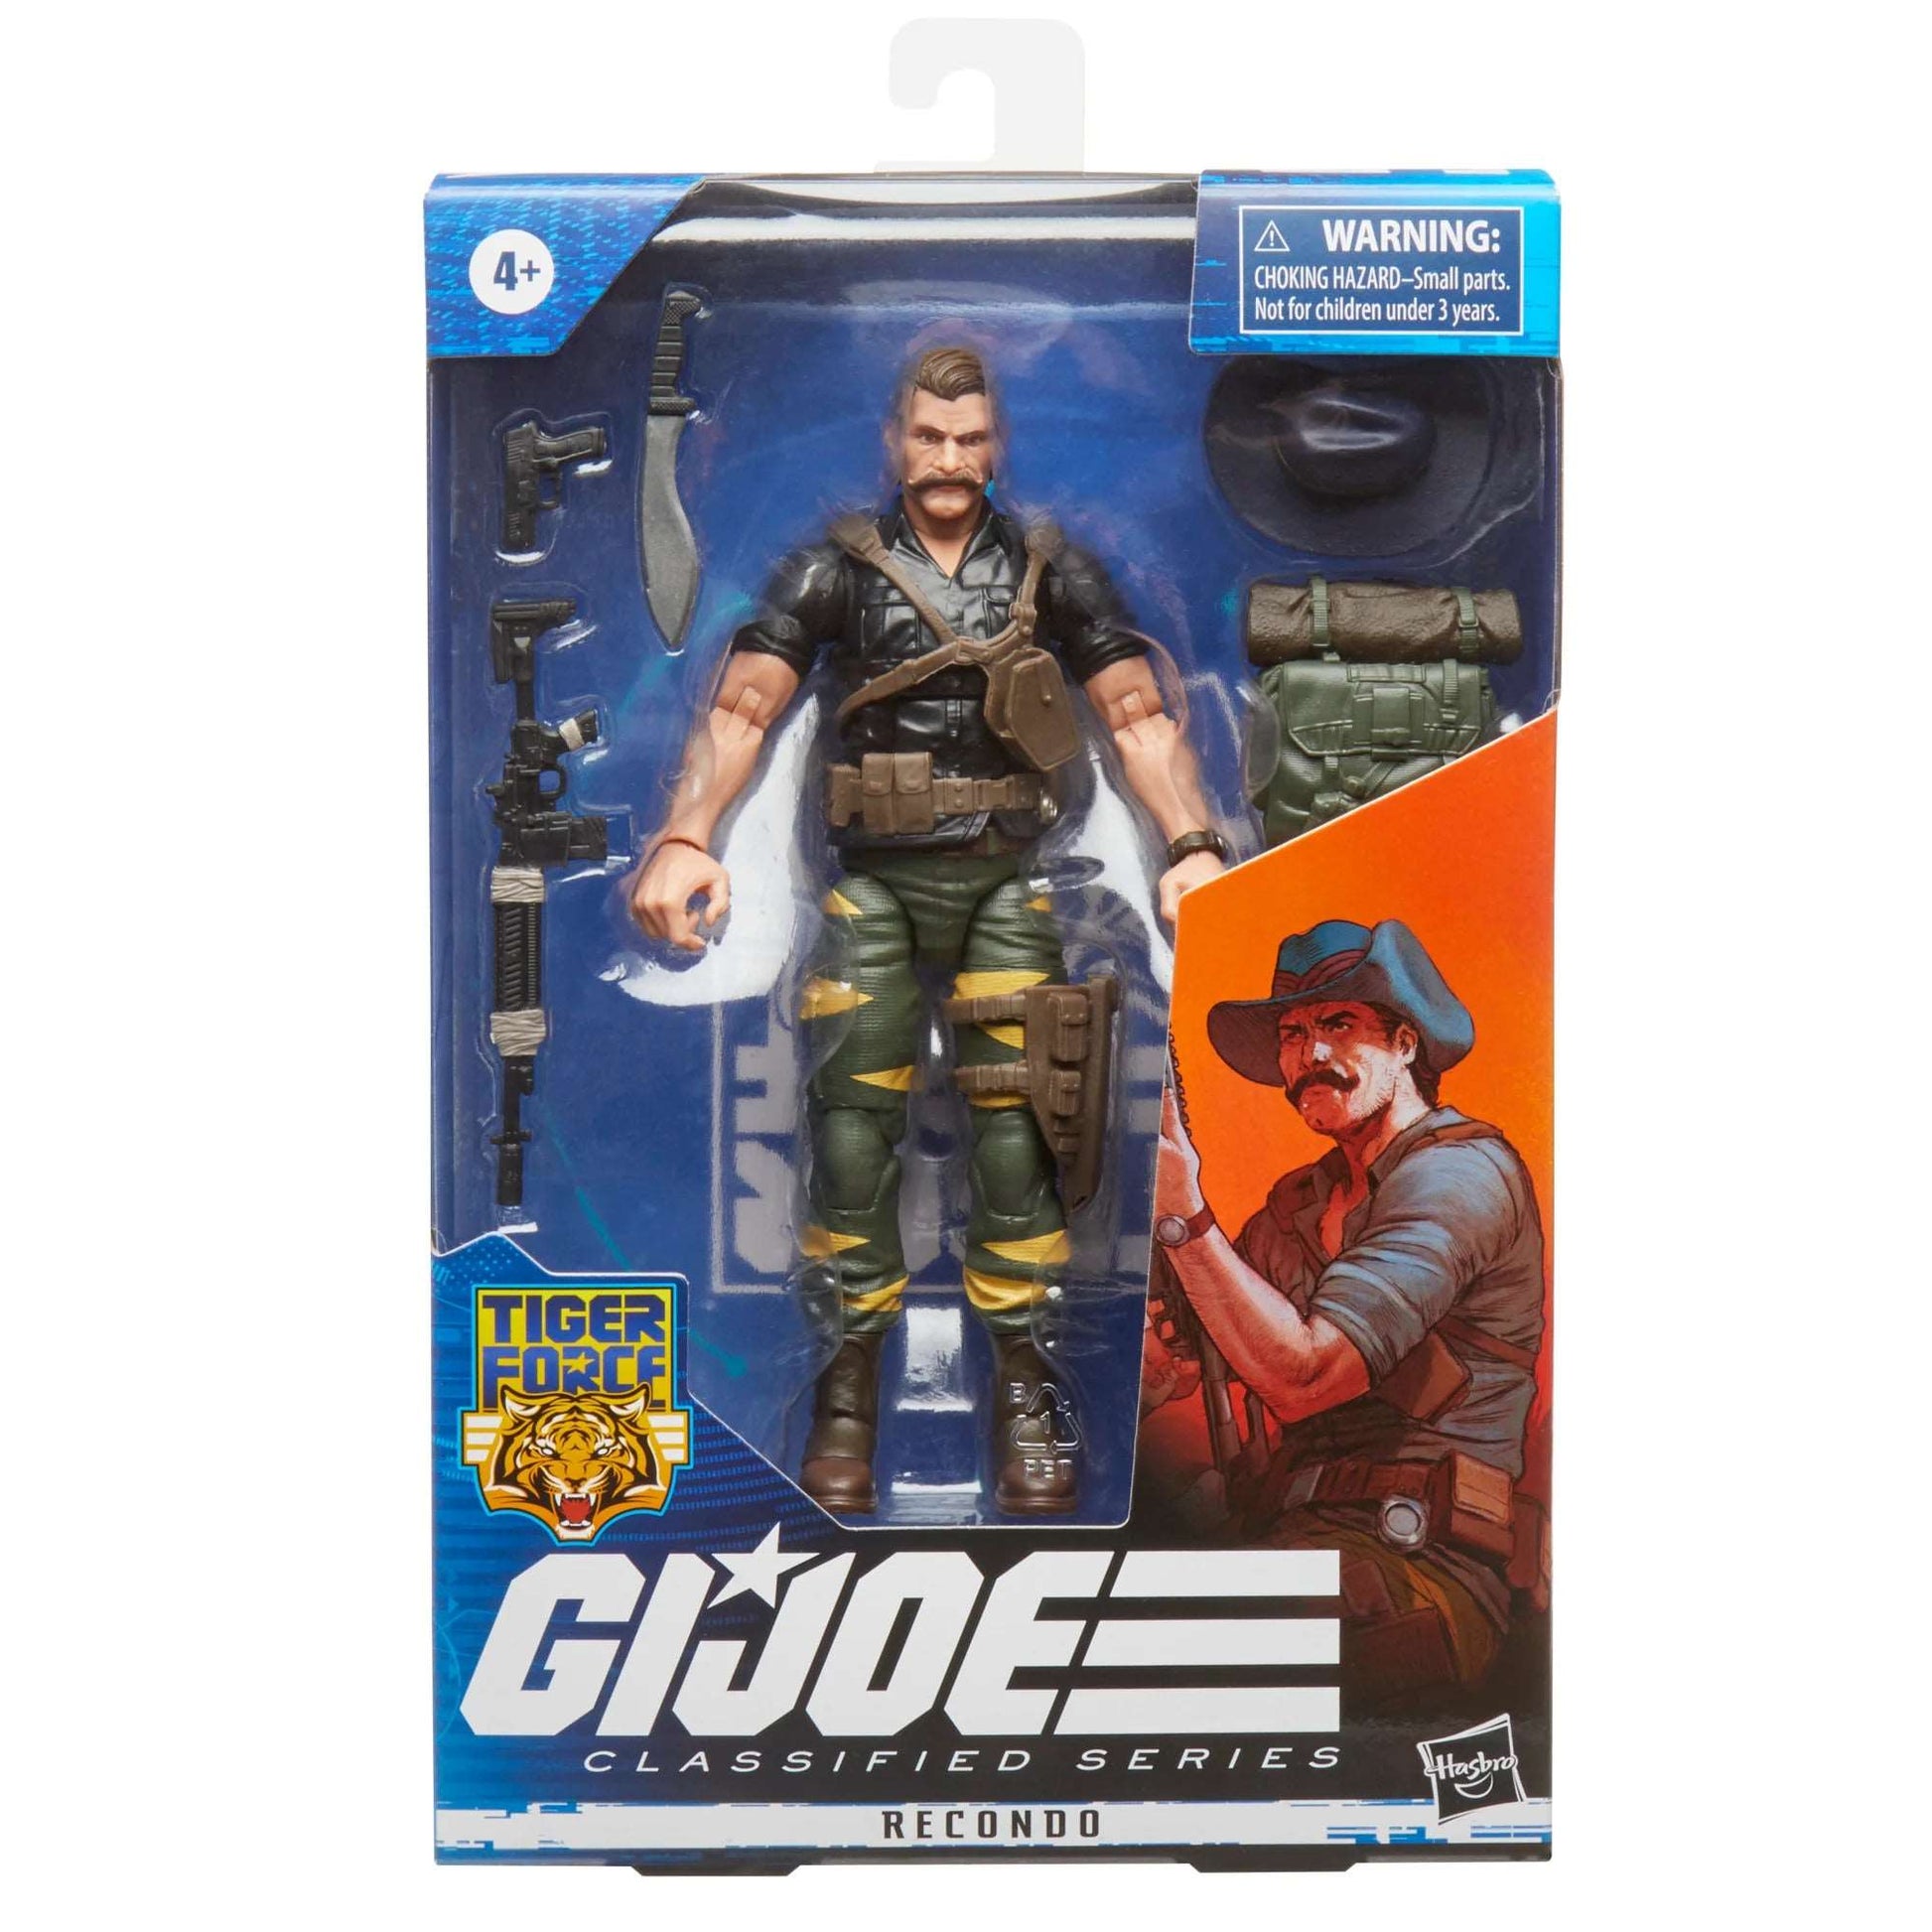 GI Joe Classified Series Tiger Force Recondo action figure front of packaging